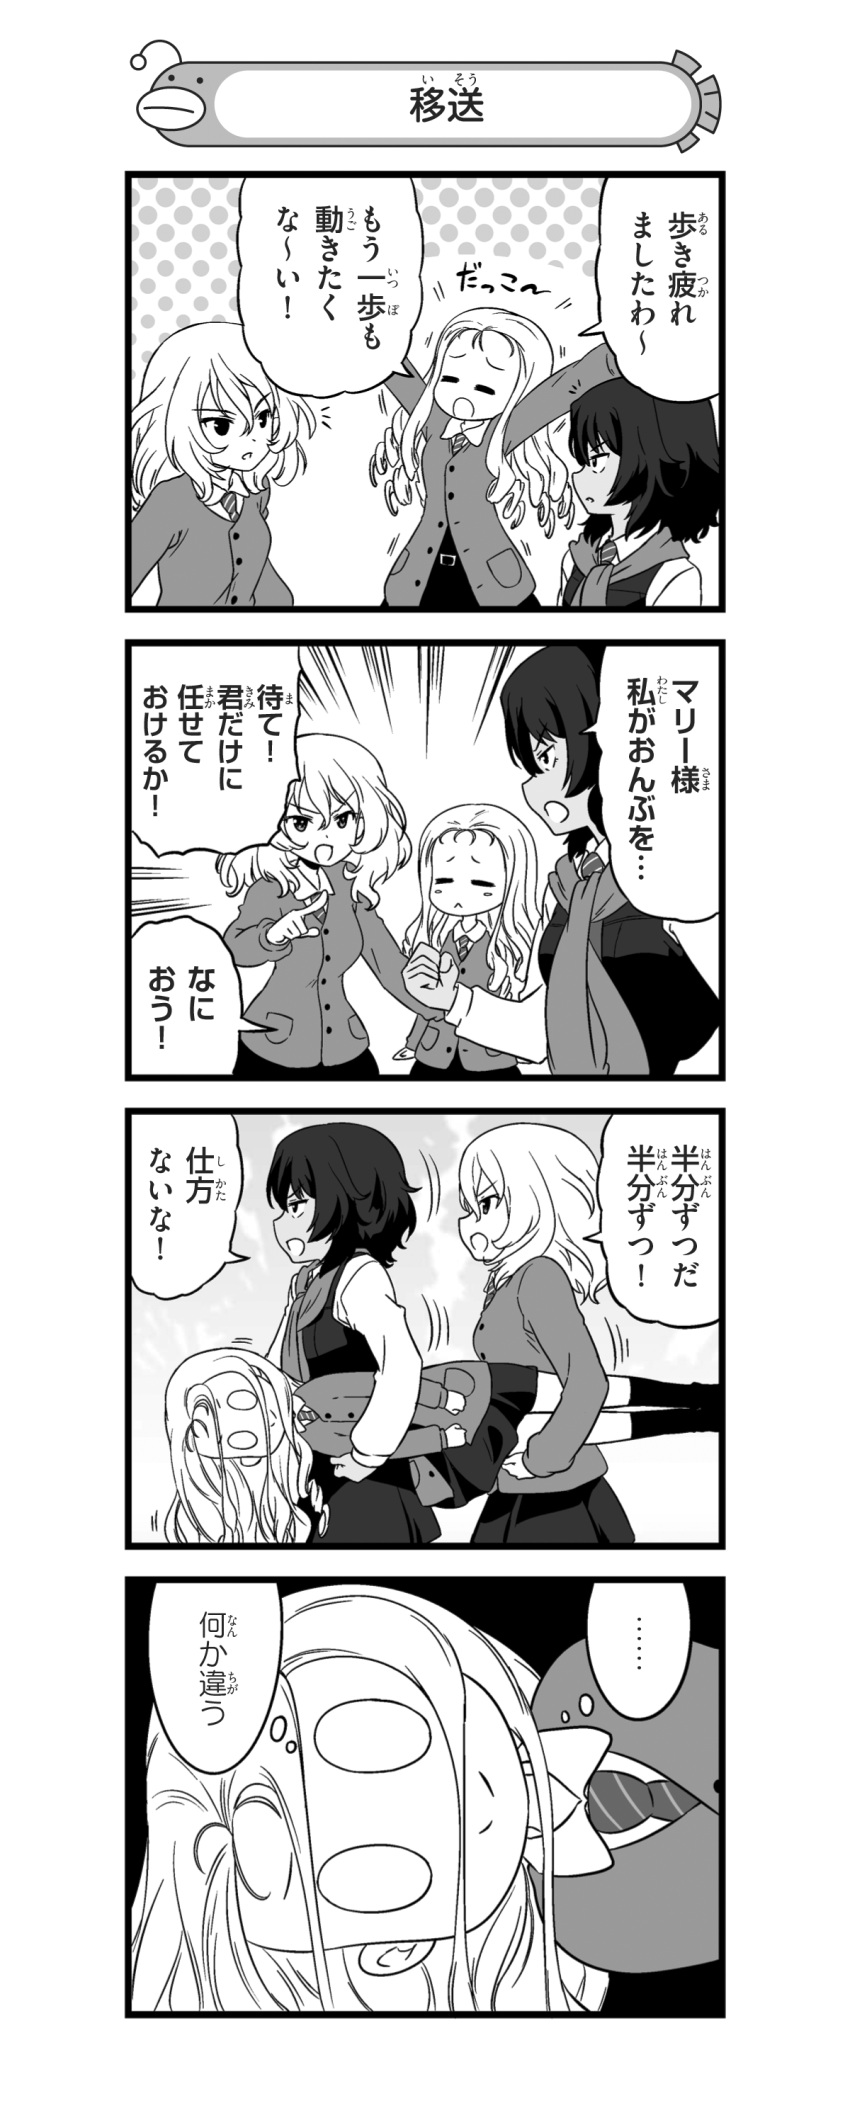 0_0 3girls 4koma absurdres andou_(girls_und_panzer) angry arms_up bc_freedom_school_uniform blush_stickers cardigan carrying closed_eyes closed_mouth comic dark_skin diagonal_stripes dress_shirt emphasis_lines eyebrows_visible_through_hair girls_und_panzer greyscale highres long_hair long_sleeves looking_at_another marie_(girls_und_panzer) medium_hair monochrome multiple_girls nanashiro_gorou necktie official_art open_mouth oshida_(girls_und_panzer) parted_lips pdf_available shirt standing striped_neckwear sweater_around_neck translation_request vest wing_collar